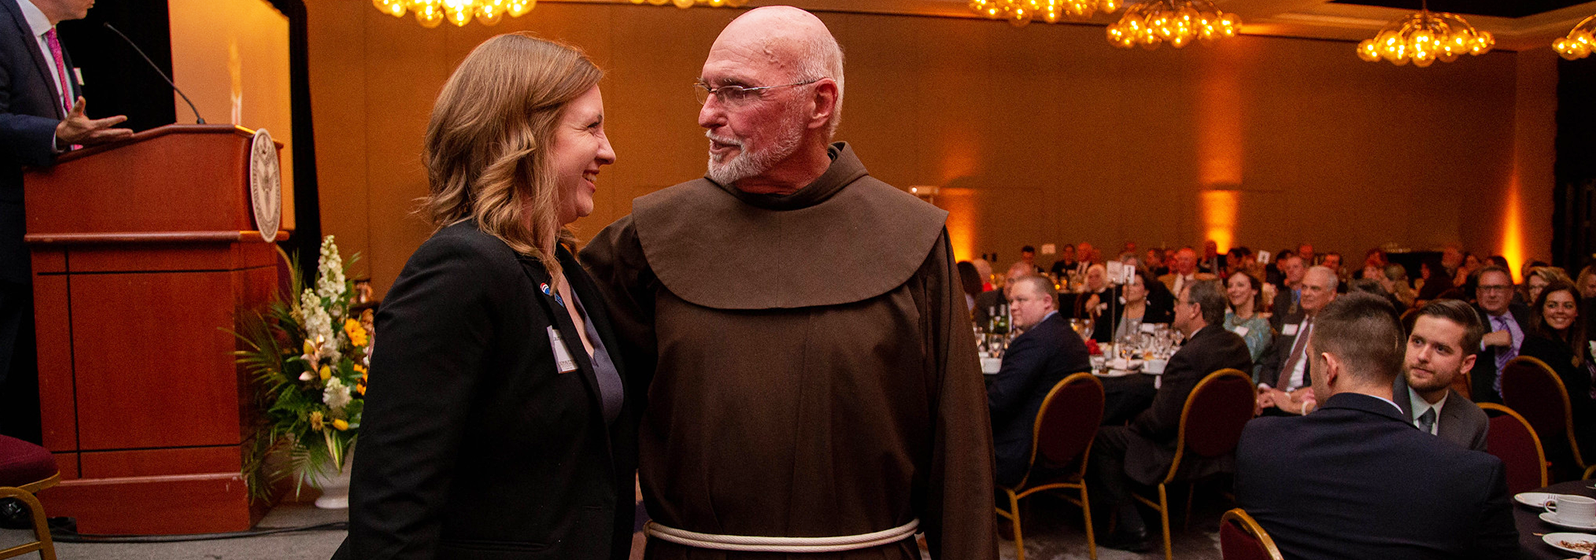 SBU&#39;s Fr. Dan Riley greets a guest at the Gaudete Awards event